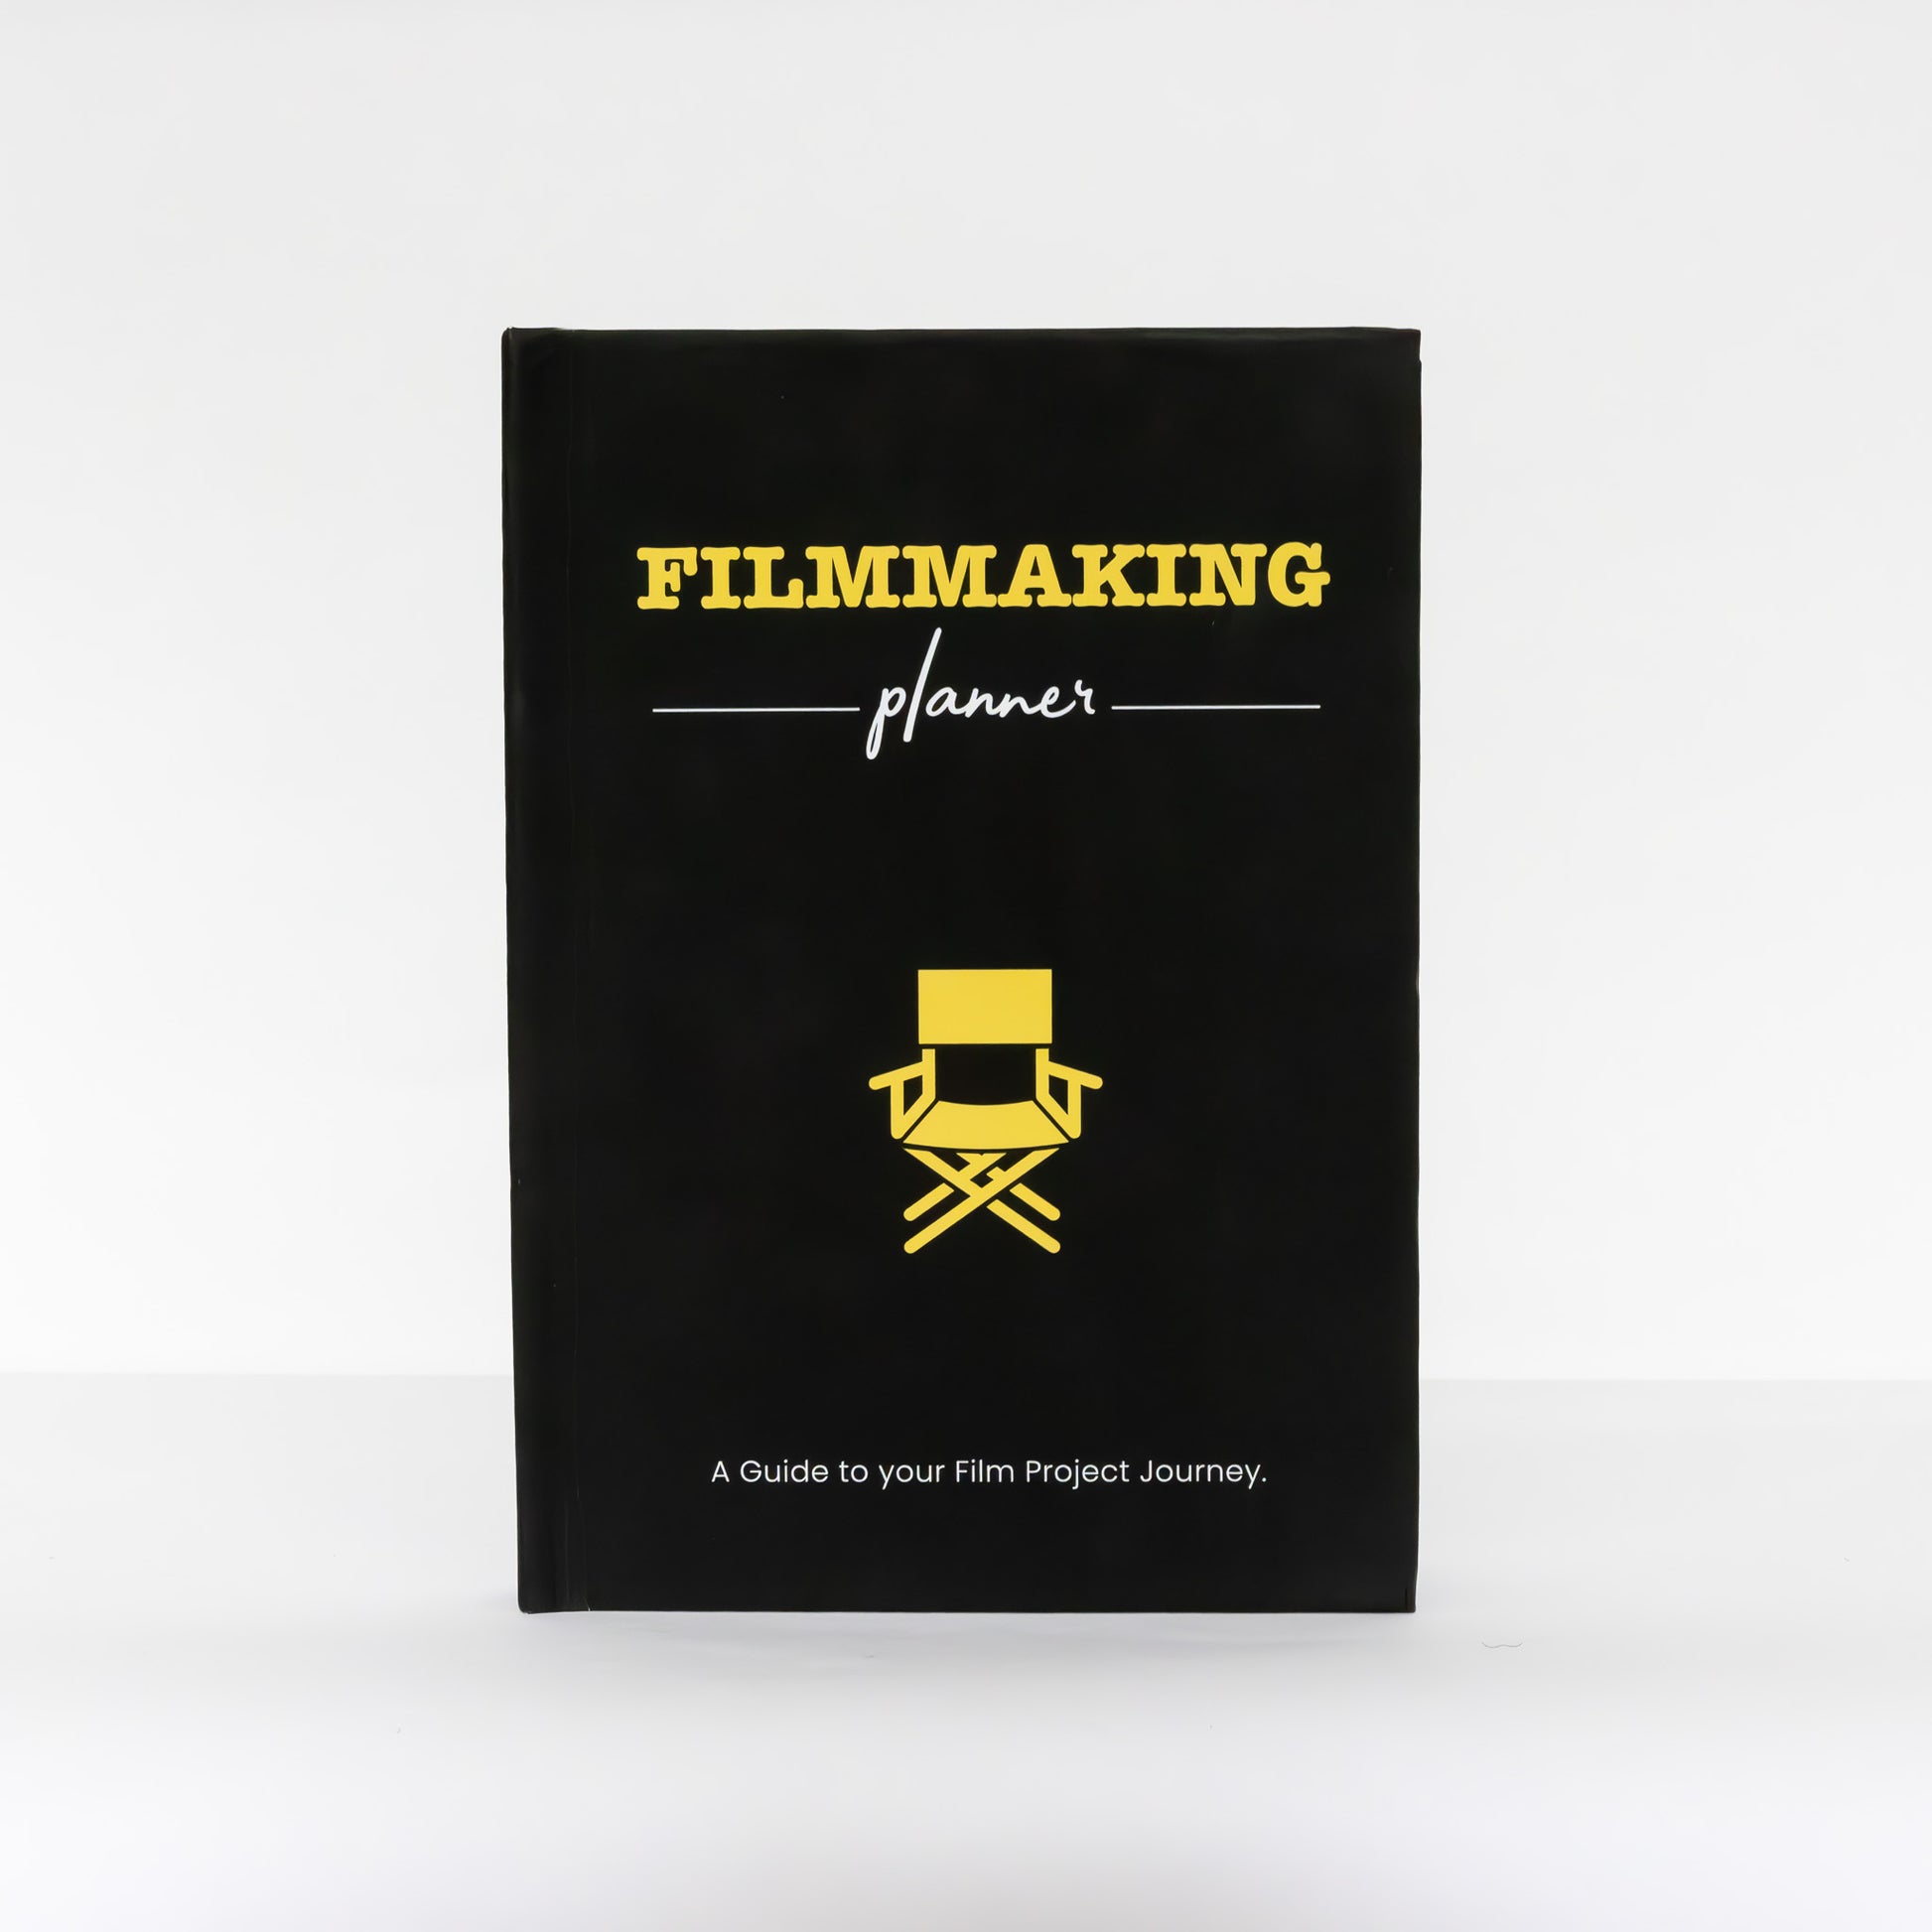 Image of the filmmaking planner with a while, plain background